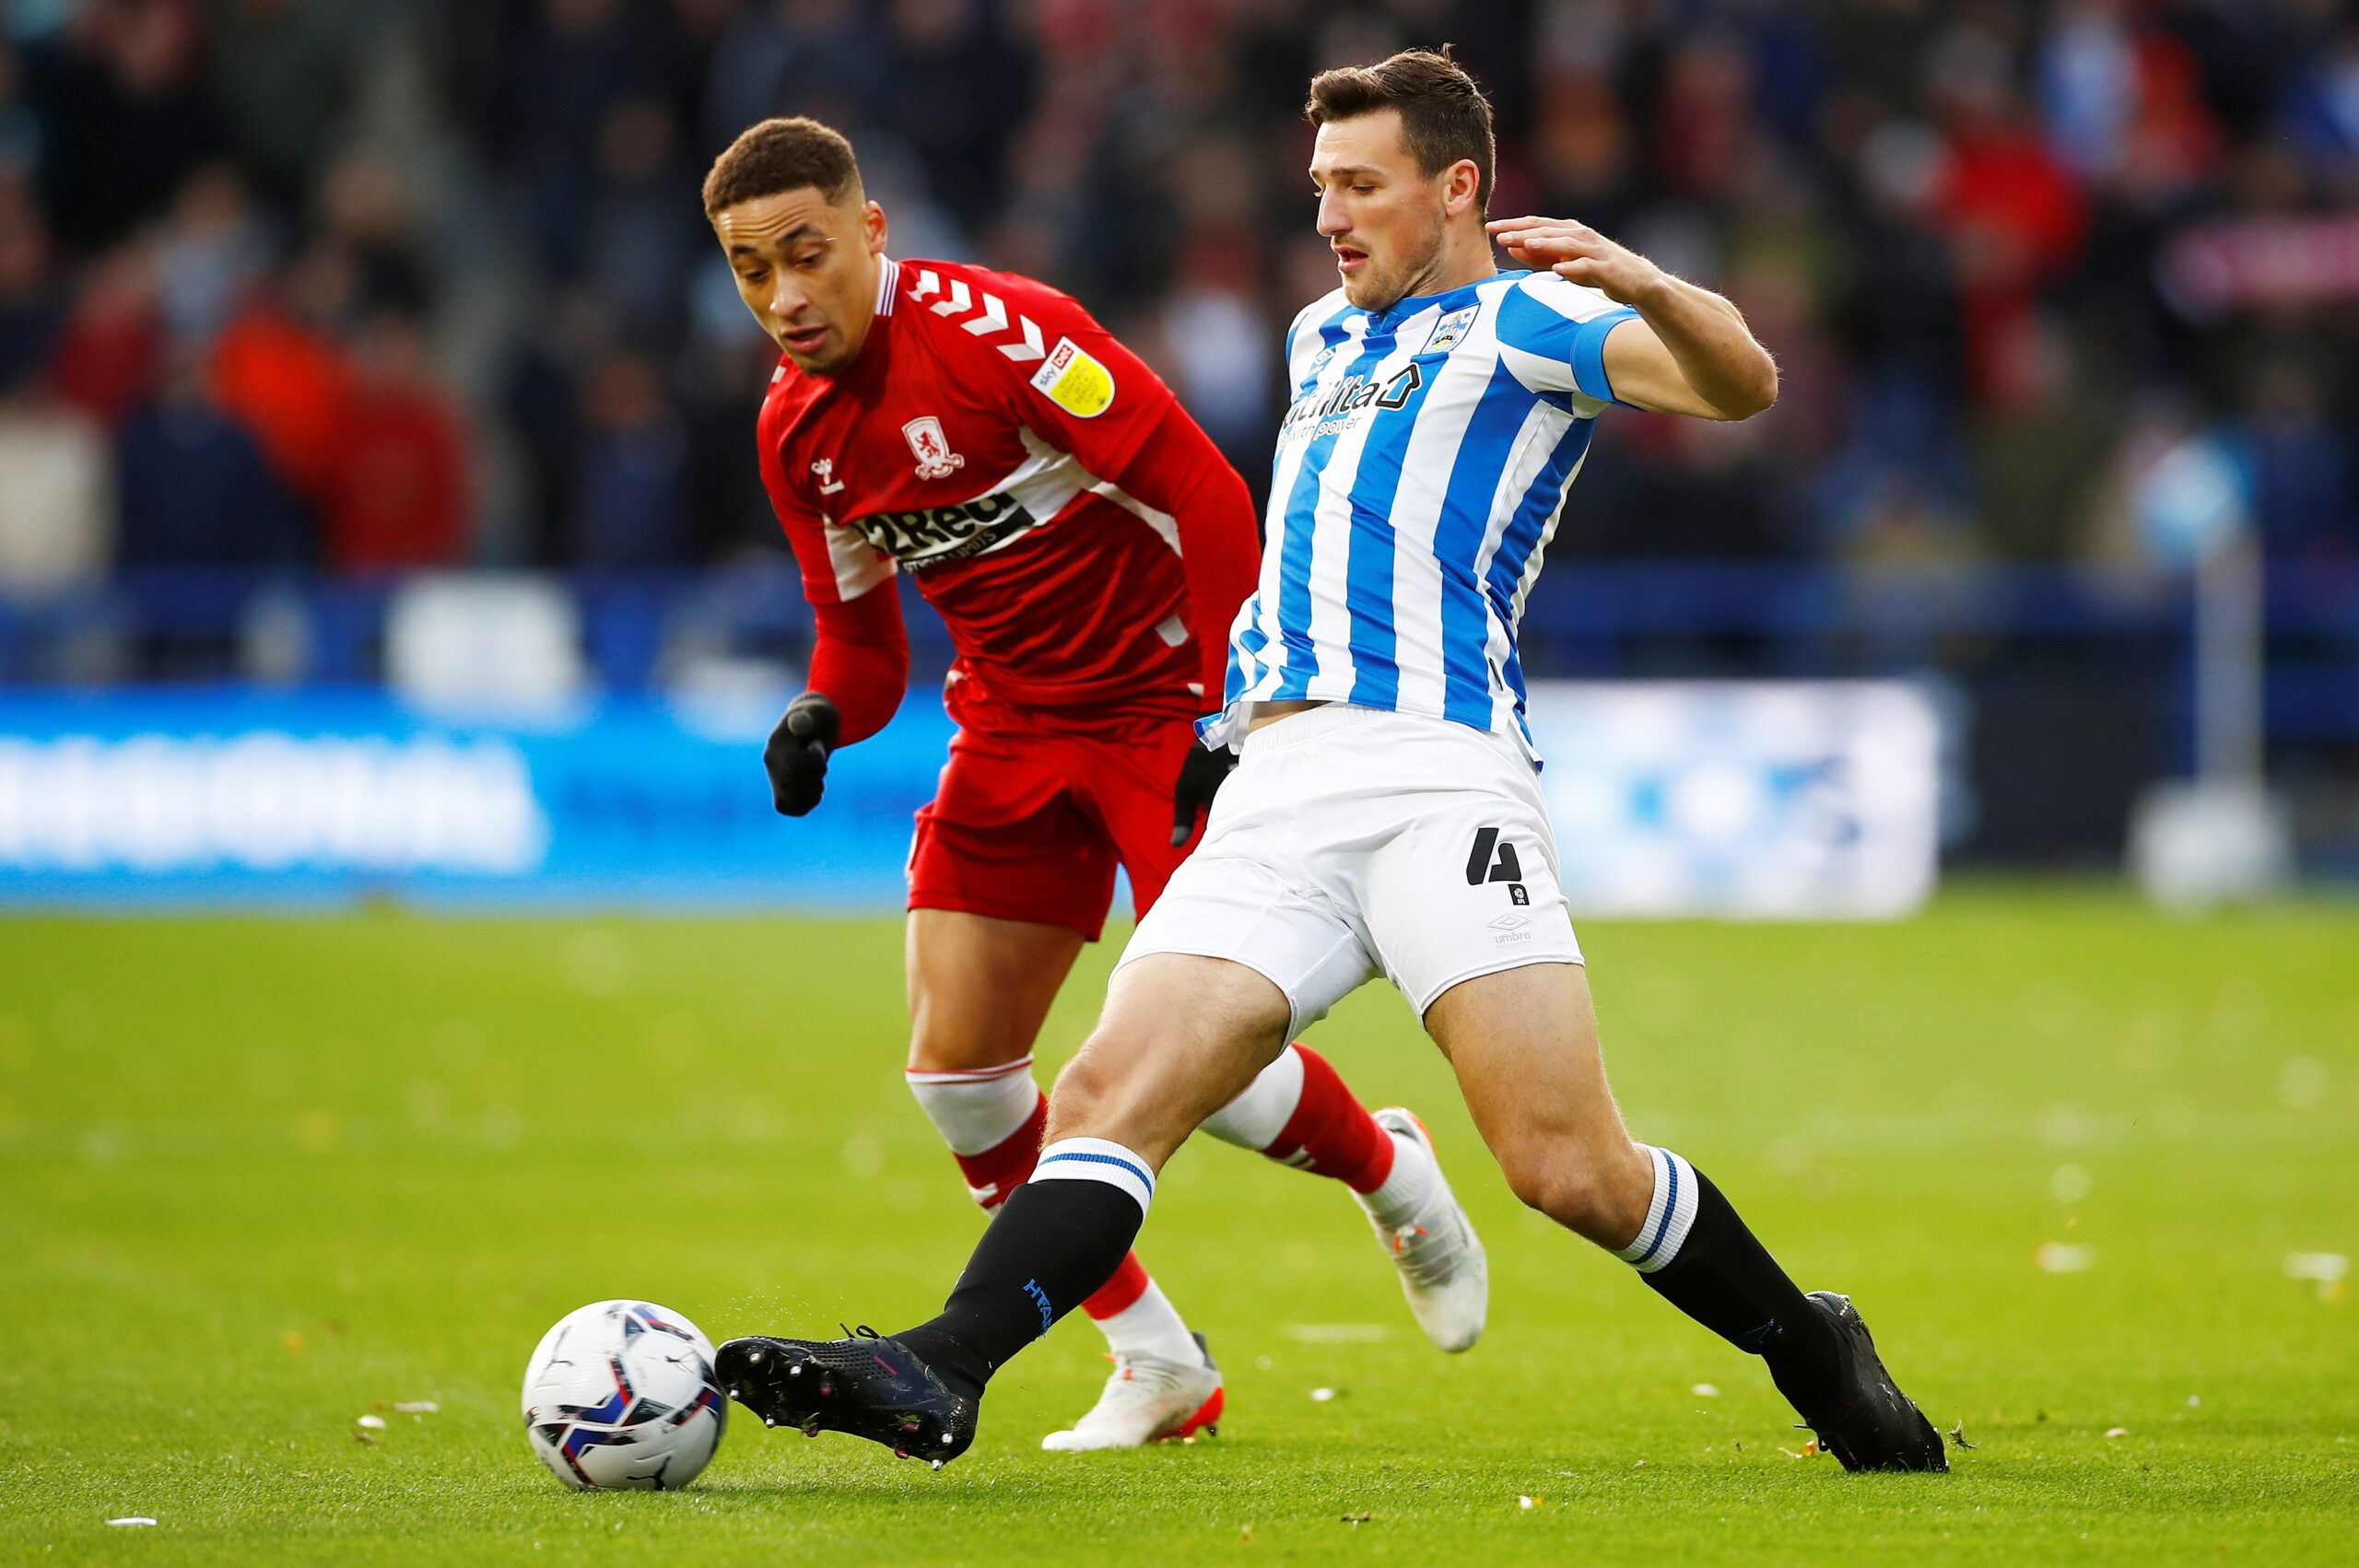 Soccer Football - Championship - Huddersfield Town v Middlesbrough - John Smith's Stadium, Huddersfield, Britain - November 27, 2021 Middlesbrough's Marcus Tavernier in action with Huddersfield Town's Matty Pearson Action Images/Jason Cairnduff